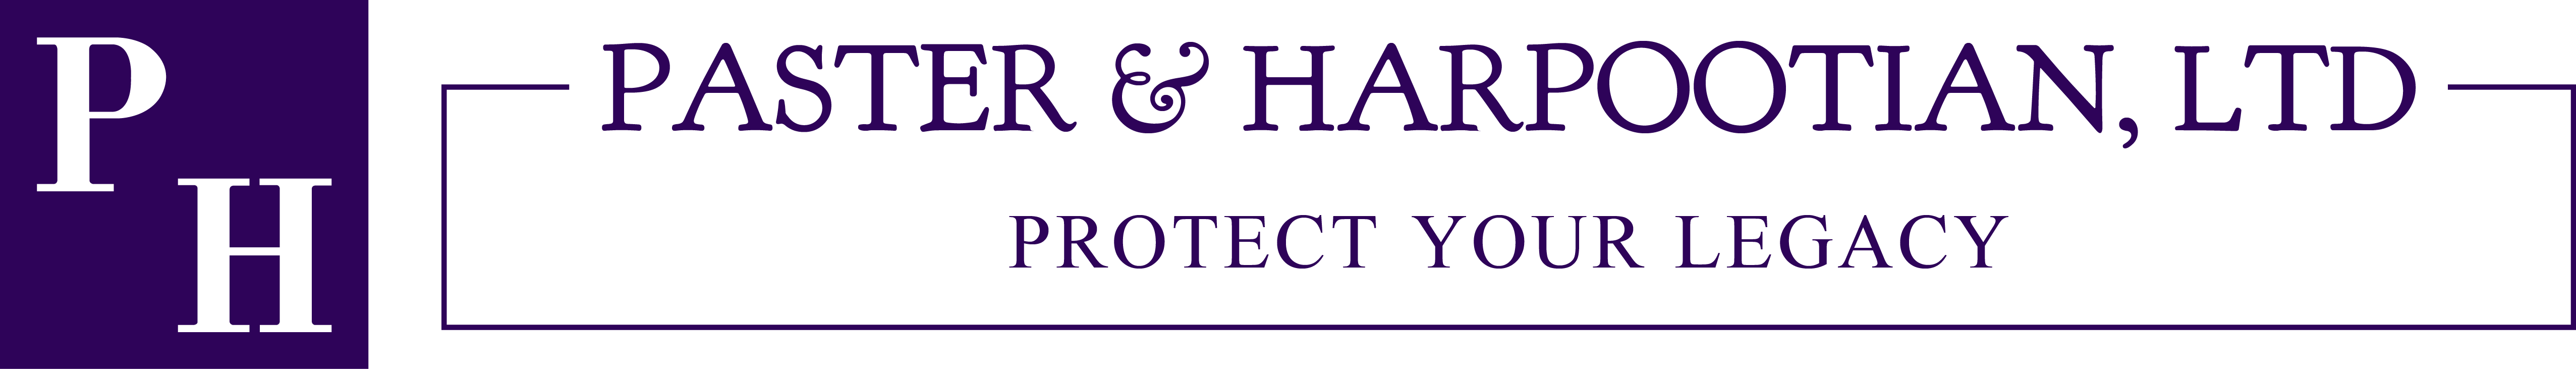 Paster & Harpootian, LTD Protect Your Legacy